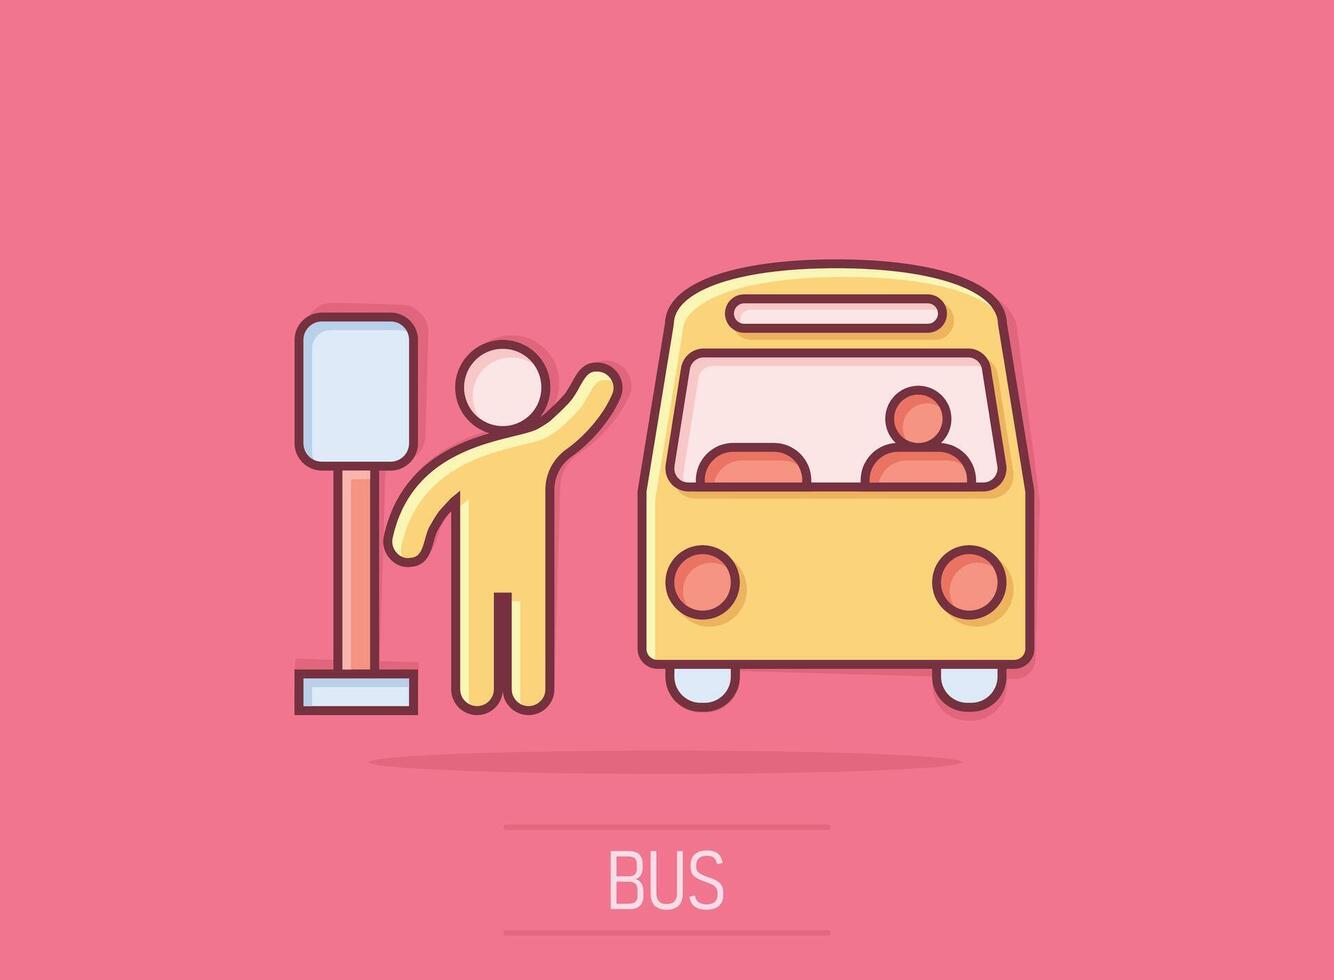 Bus station icon in comic style. Auto stop cartoon vector illustration on isolated background. Autobus vehicle splash effect business concept.